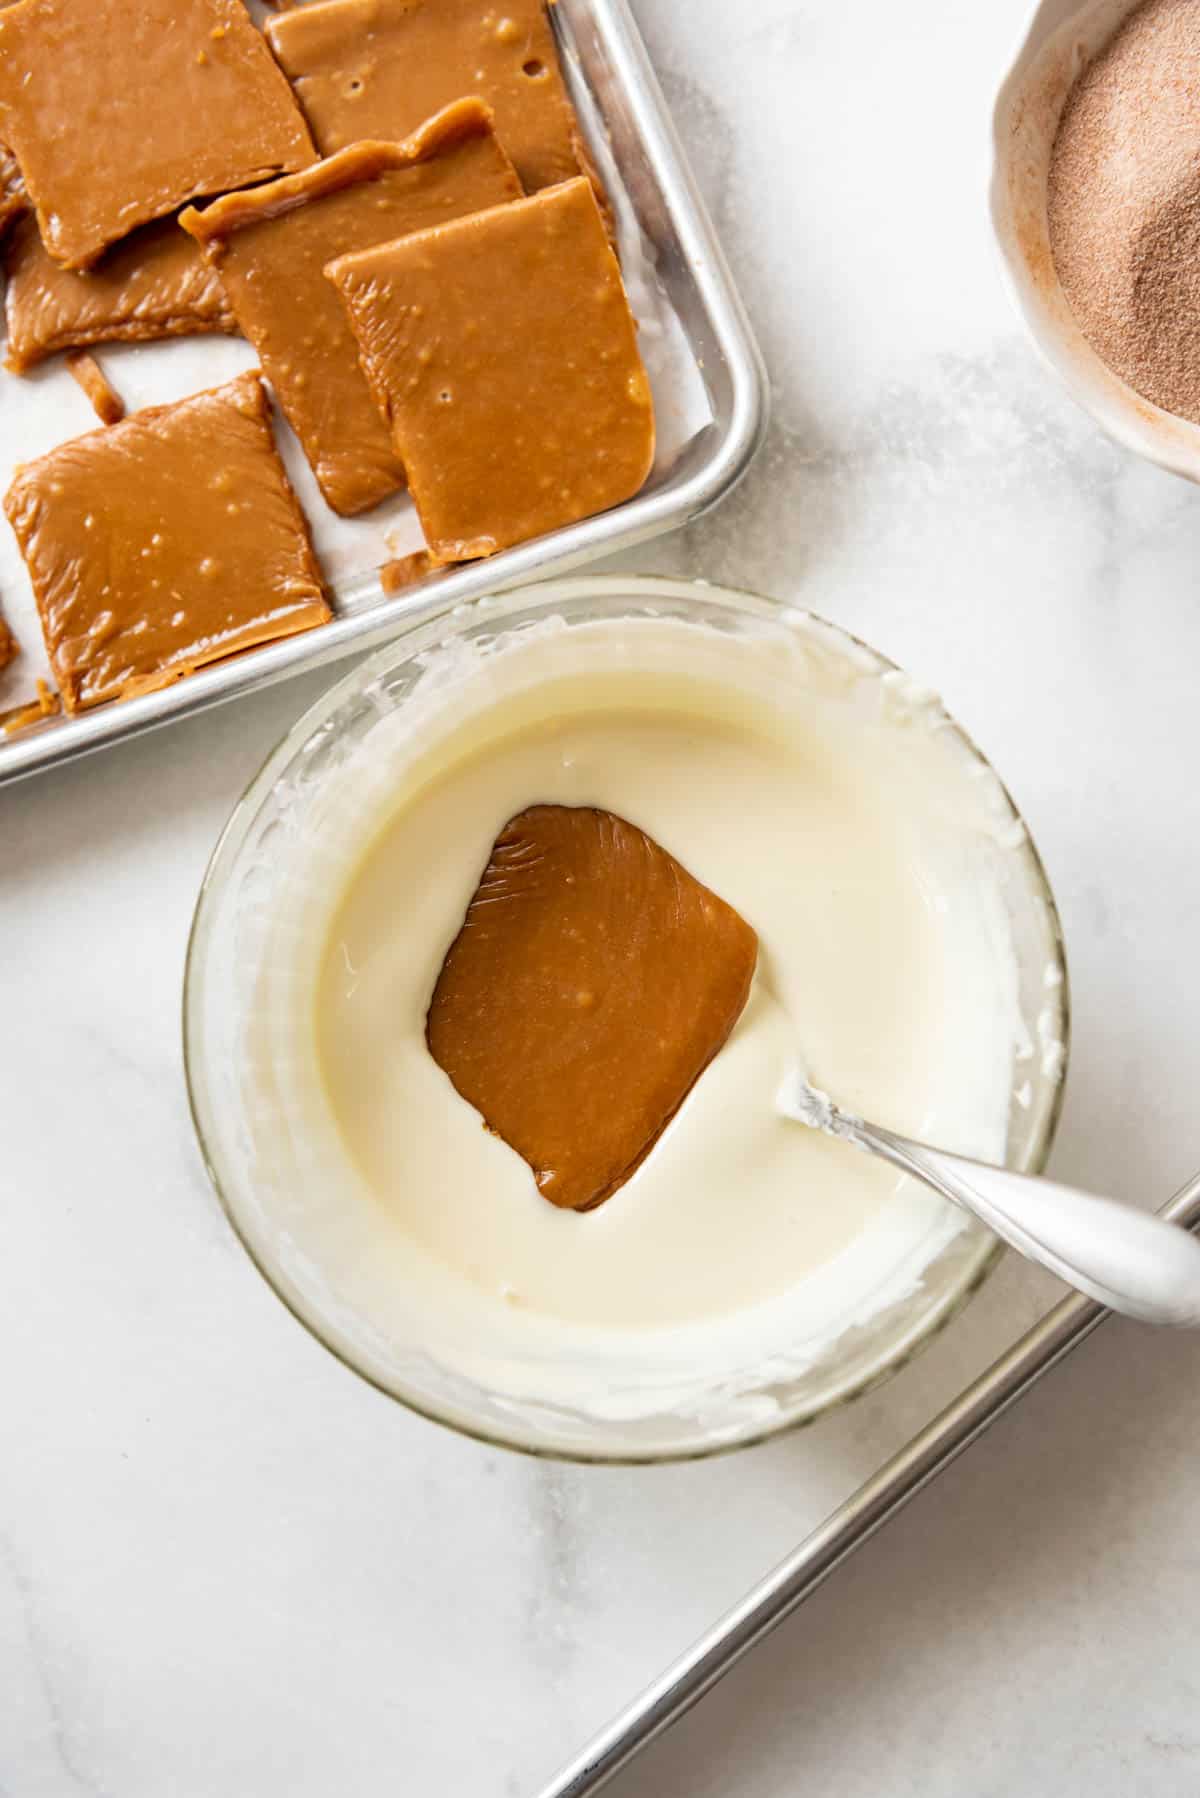 An image of a square piece of toffee getting dipped into a bowl of white chocolate.